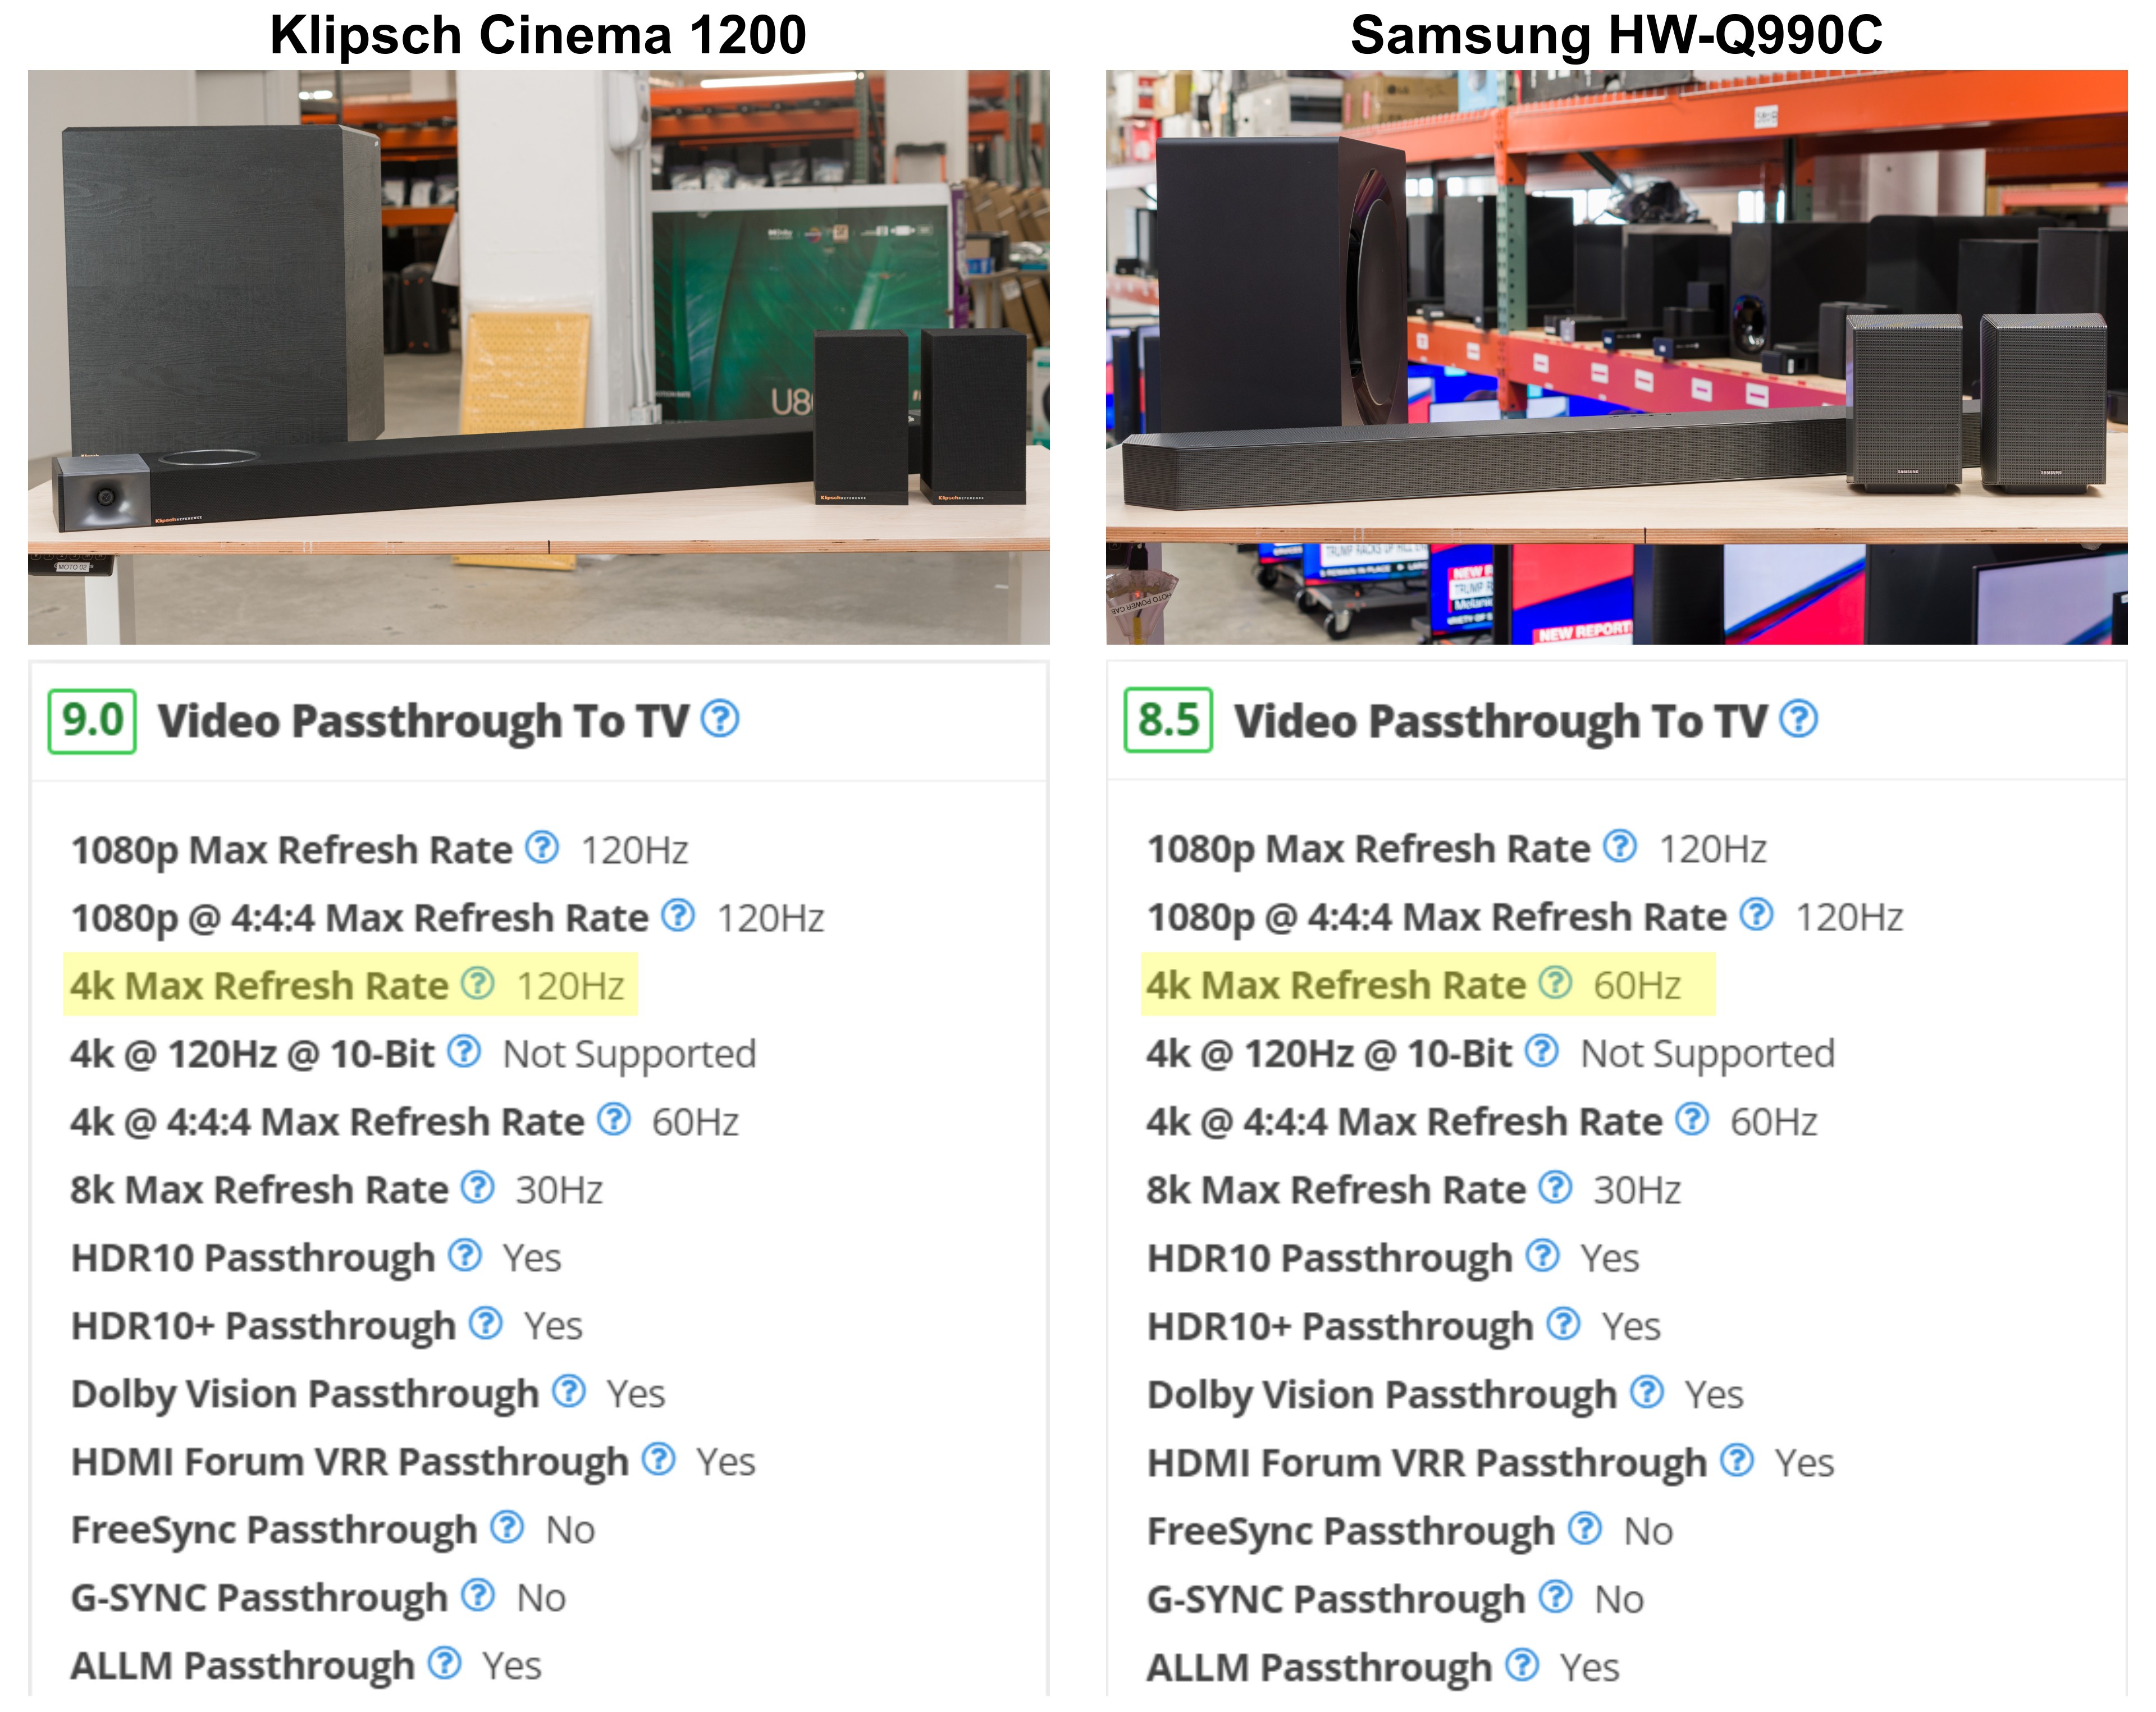 Screenshots of the “Video Passthrough To TV” boxes from our reviews of the Klipsch Cinema 1200 and Samsung HW-Q990C soundbars.